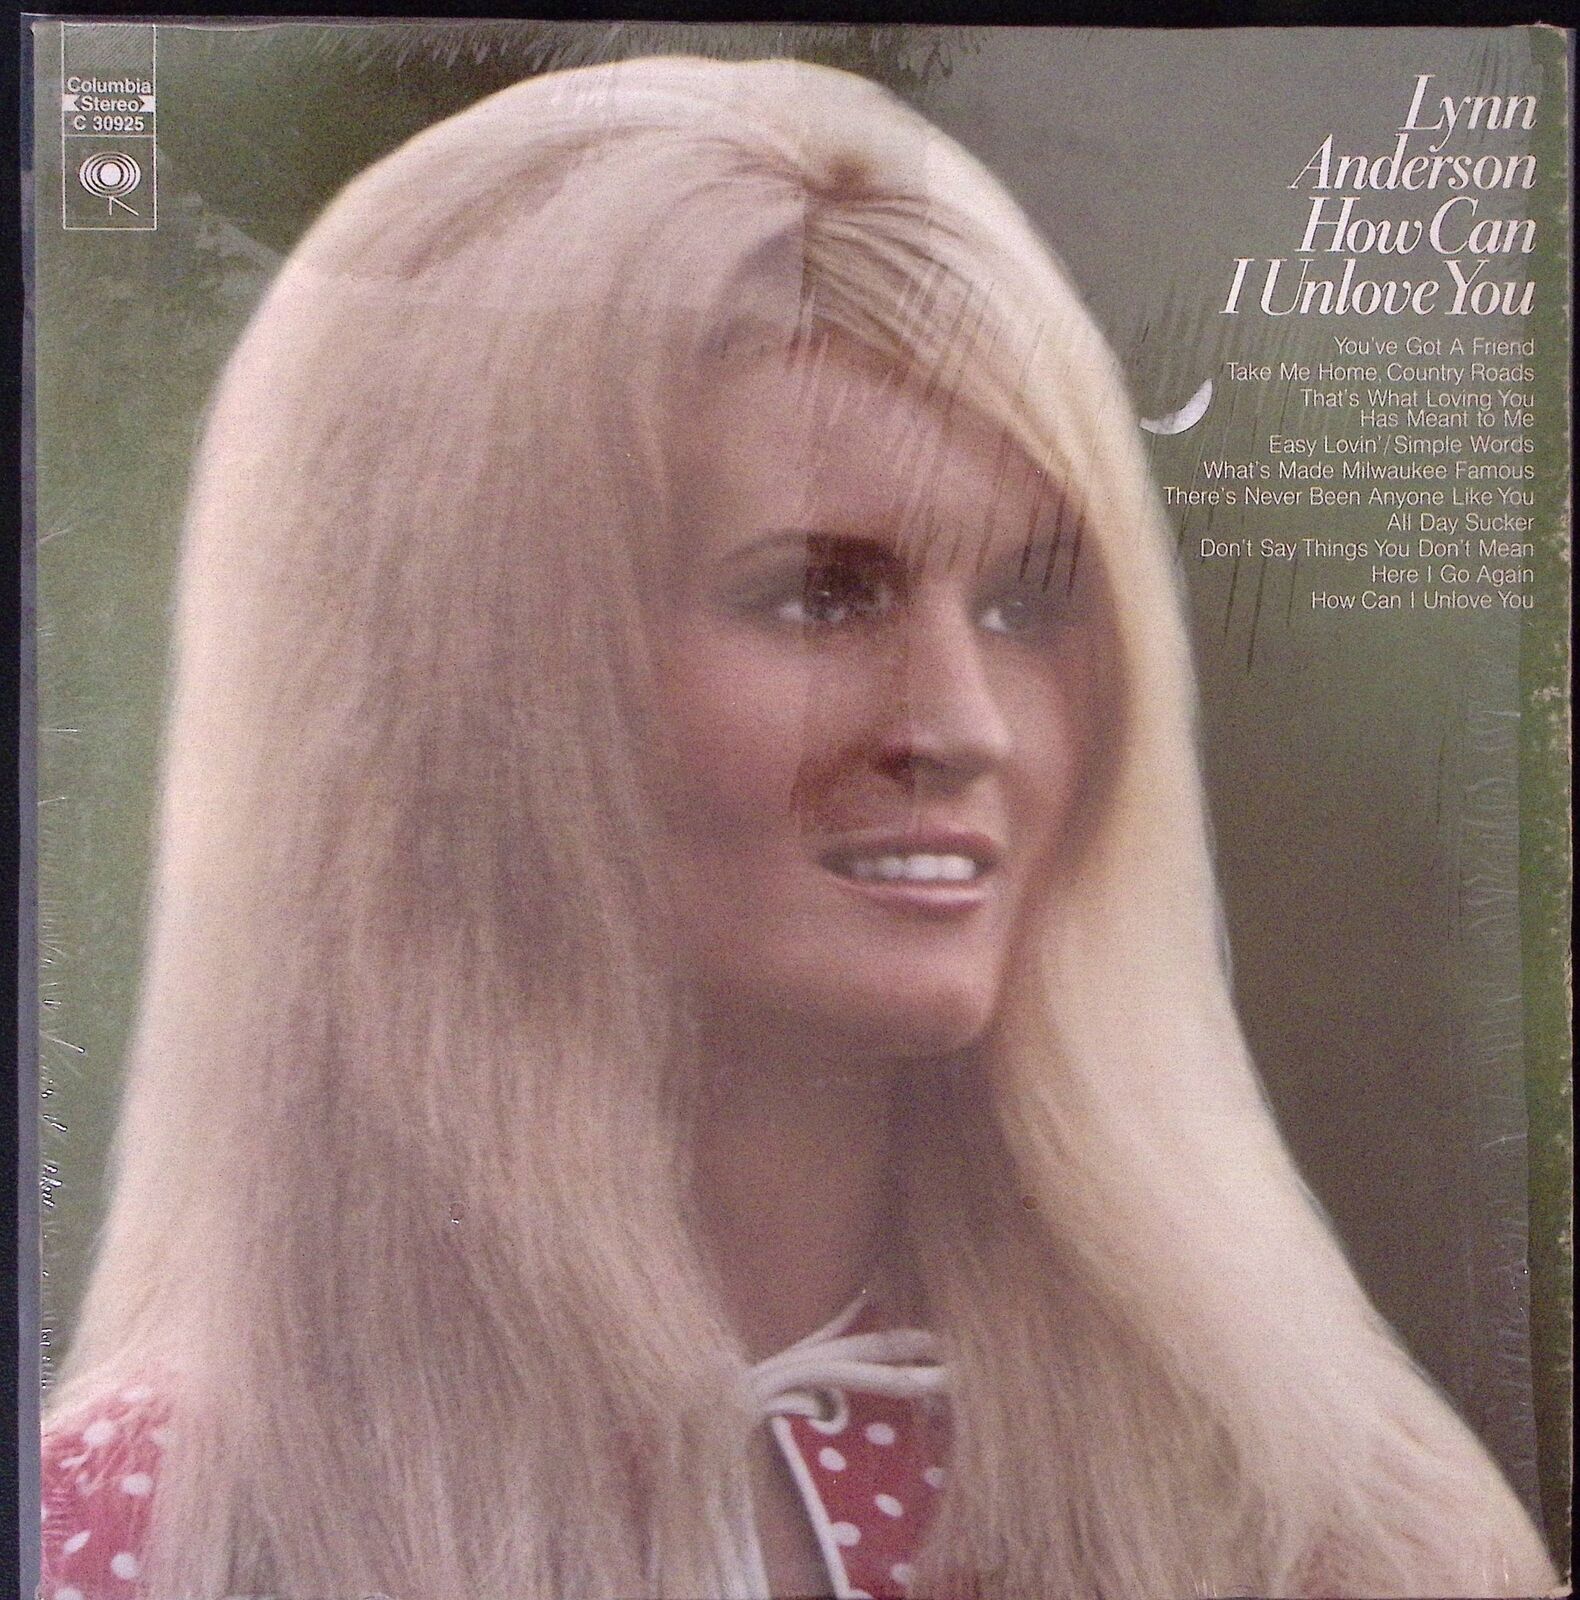 LYNN ANDERSON HOW CAN I UNLOVE YOU COLUMBIA RECORDS SHRINK VINYL LP 120-8W